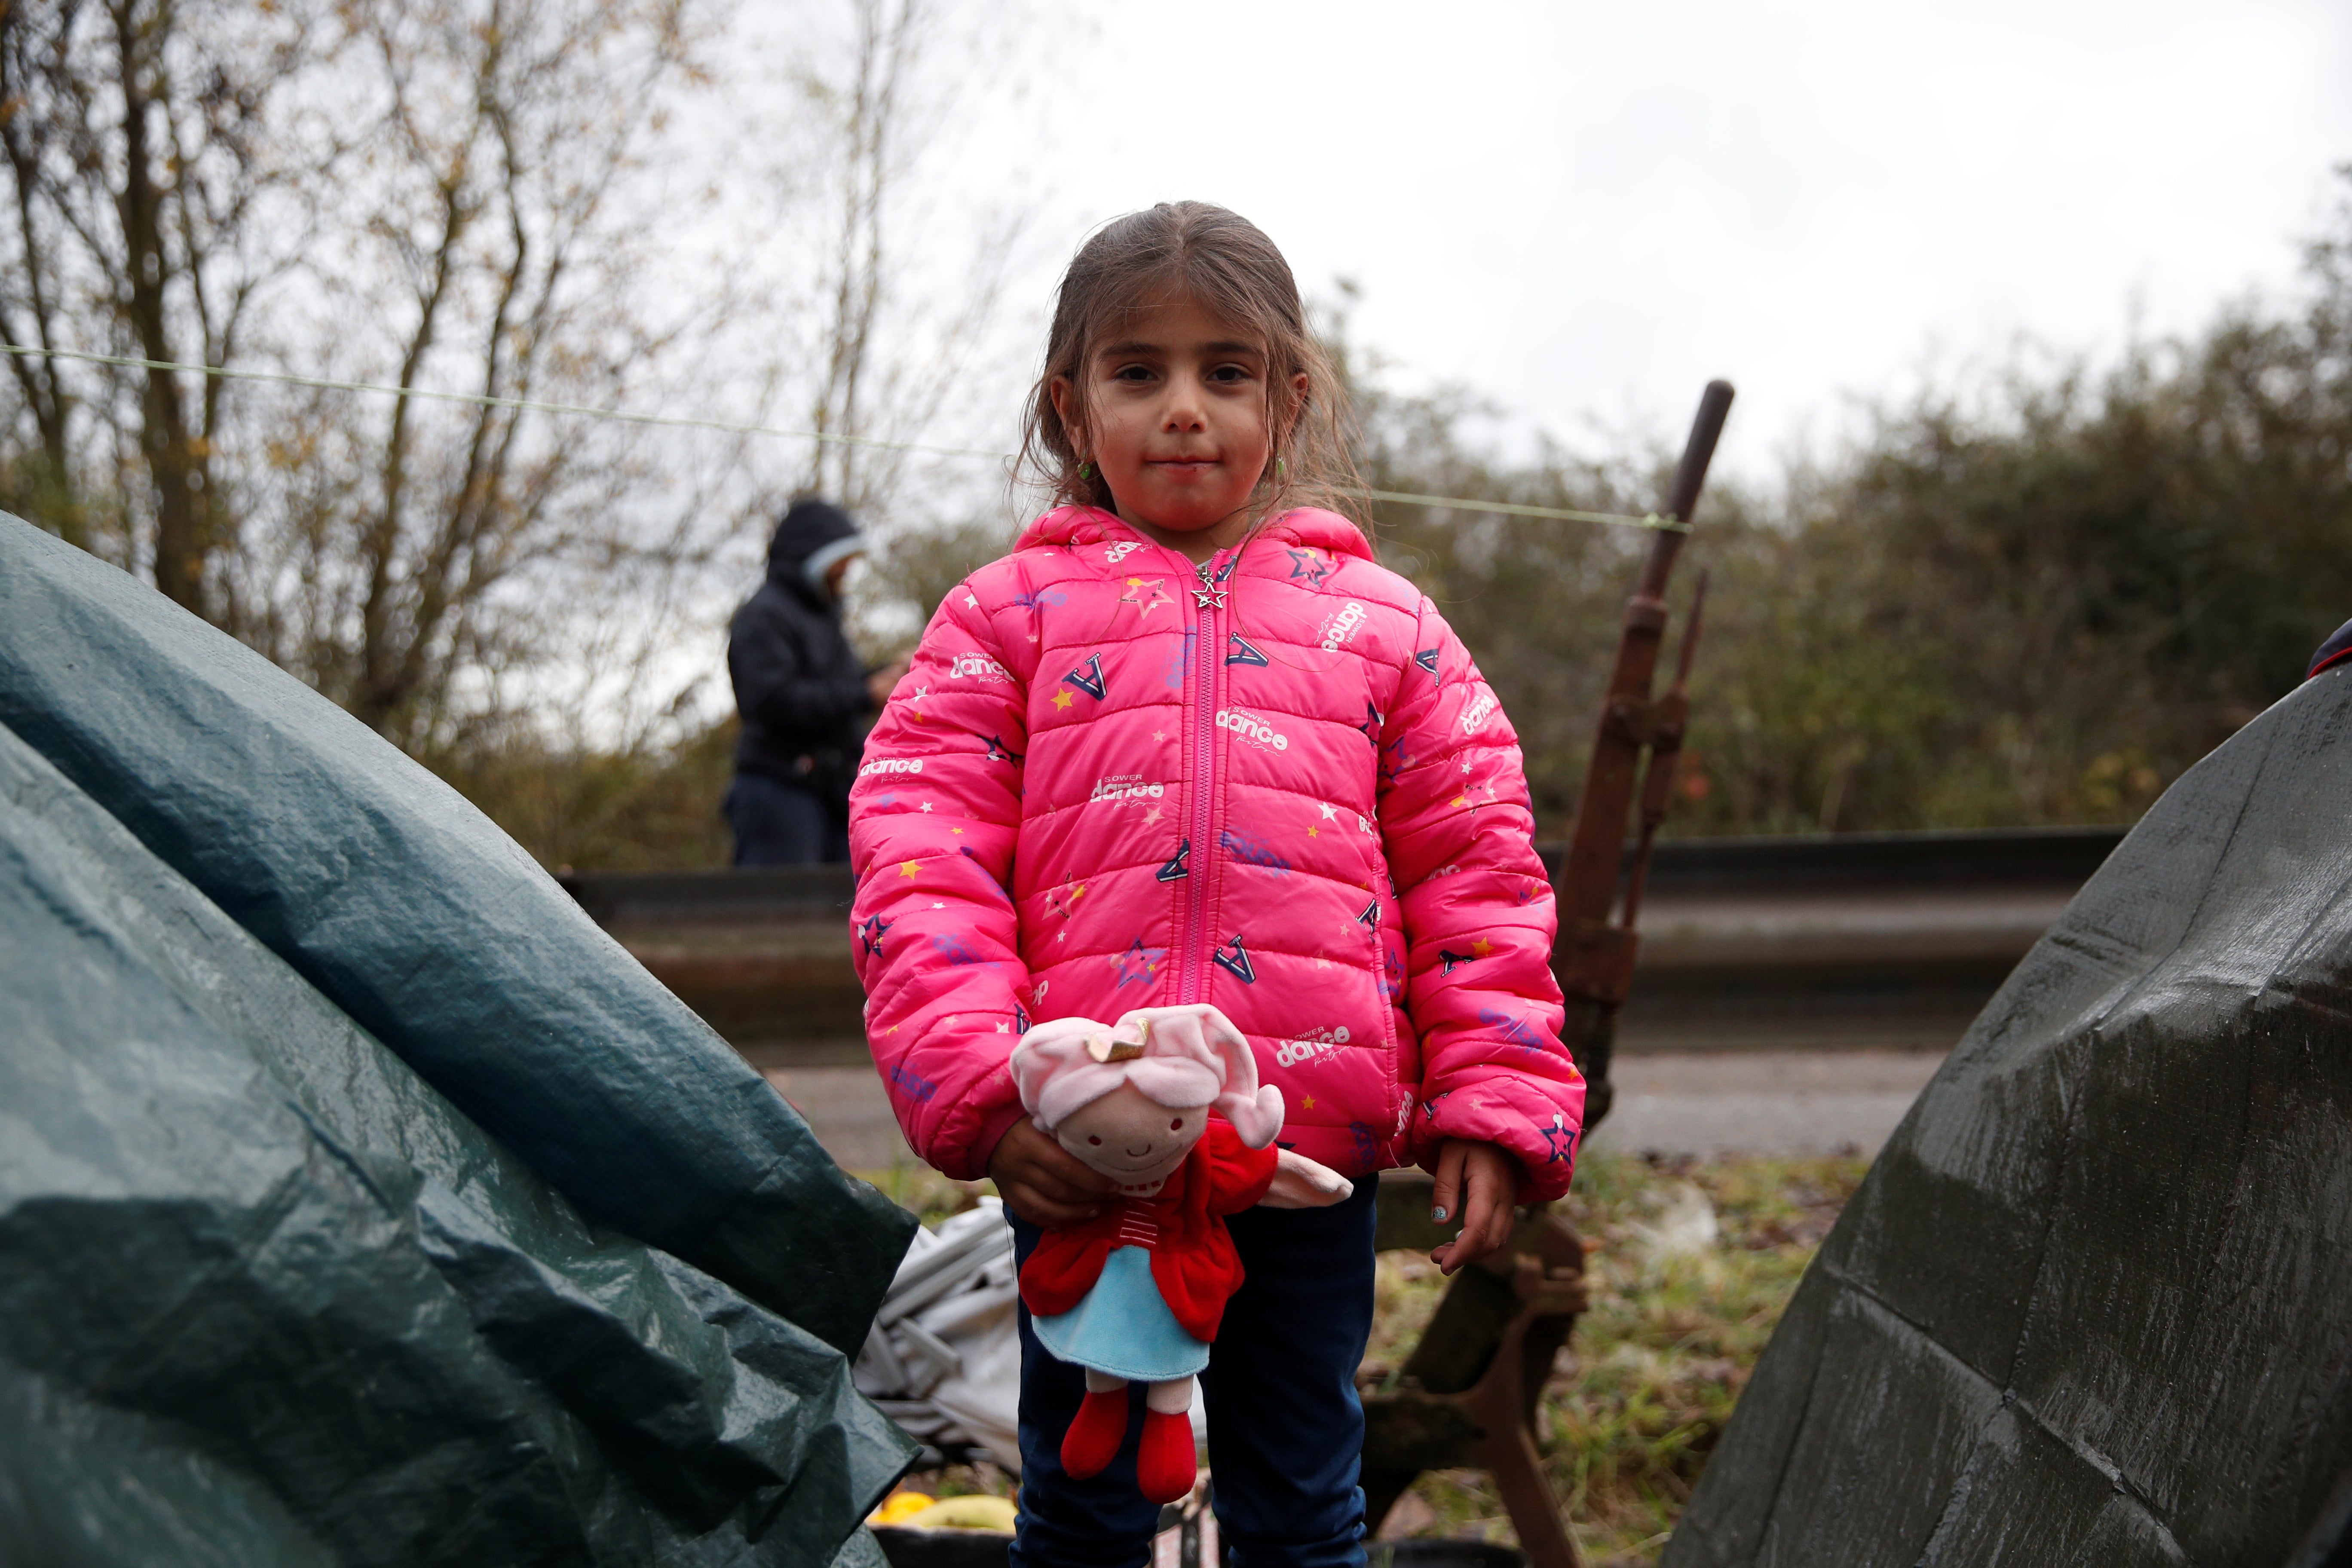 Migrant child Lya from Iraq poses at a makeshift migrant camp in Calais